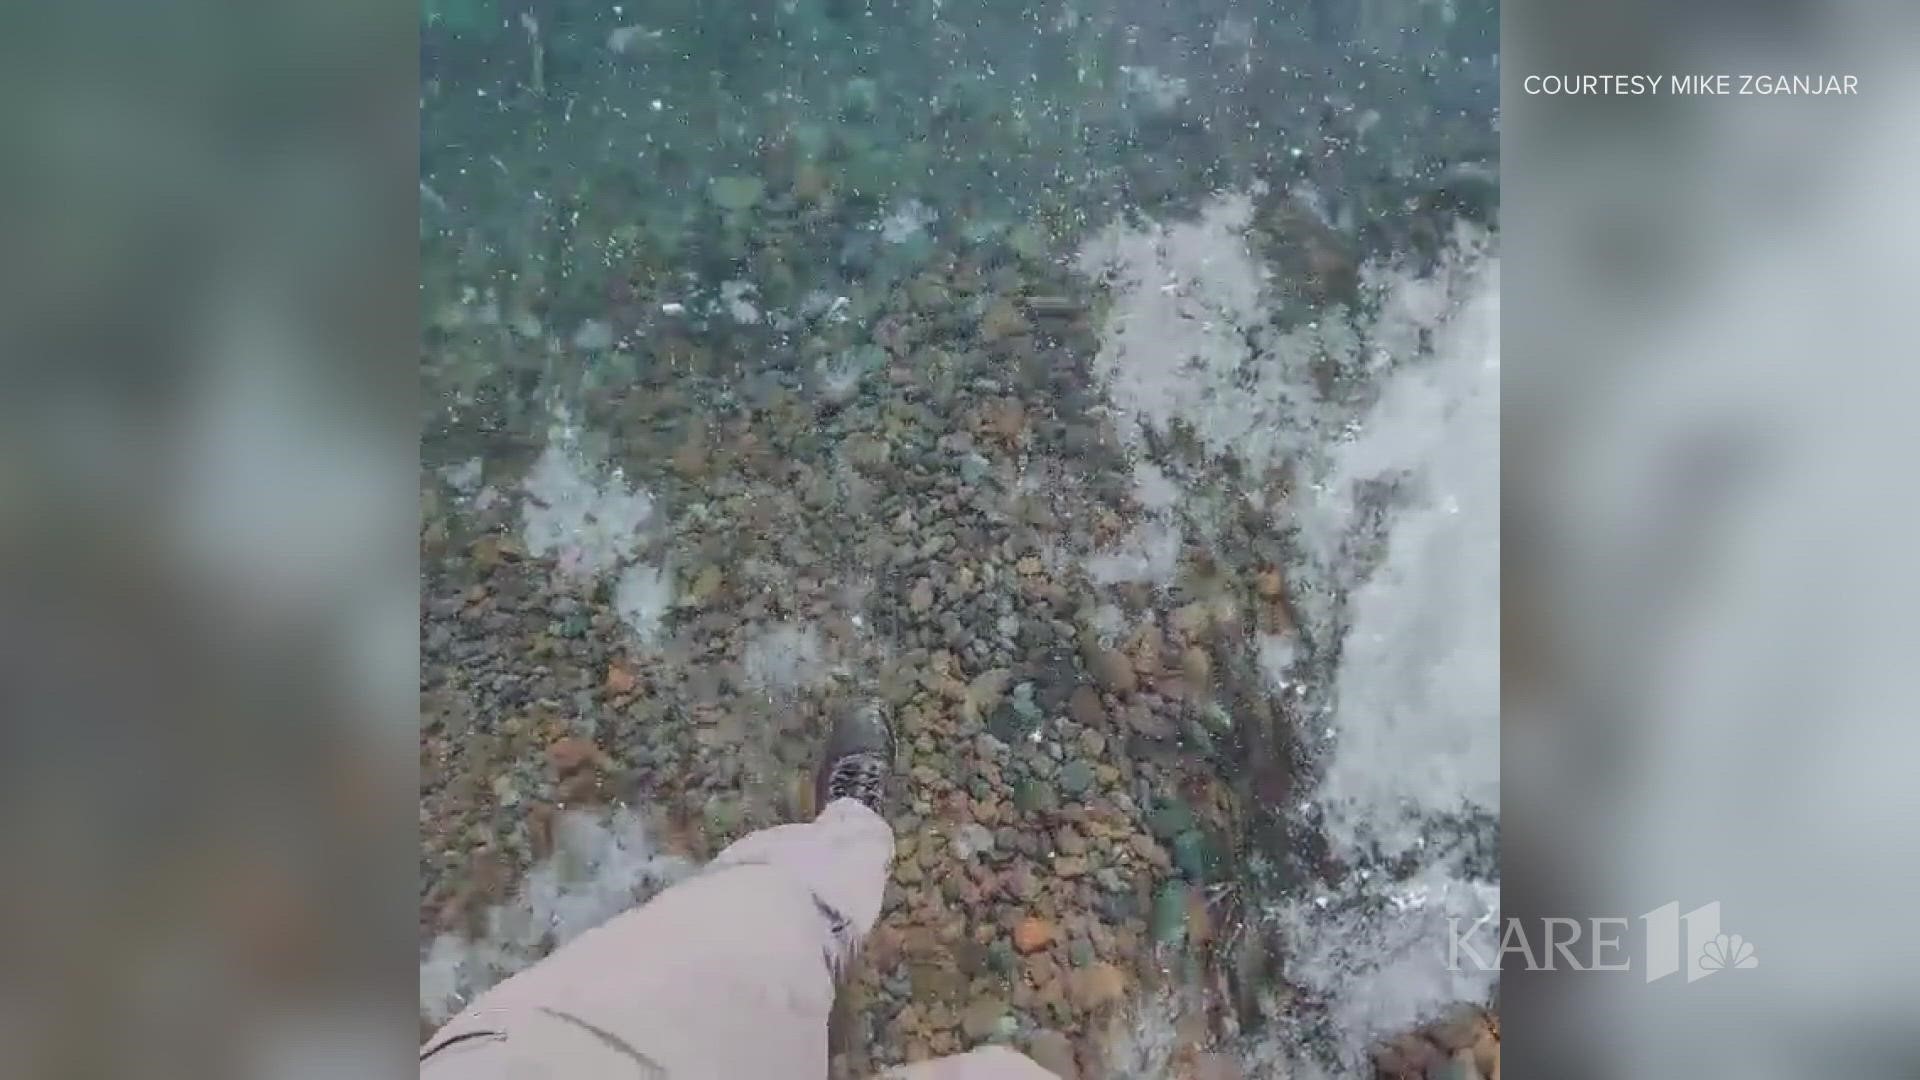 The ice on Lake Superior was crystal clear and strong enough to walk on near Grand Marais recently, the perfect conditions for Mike Zganjar to look for agates.